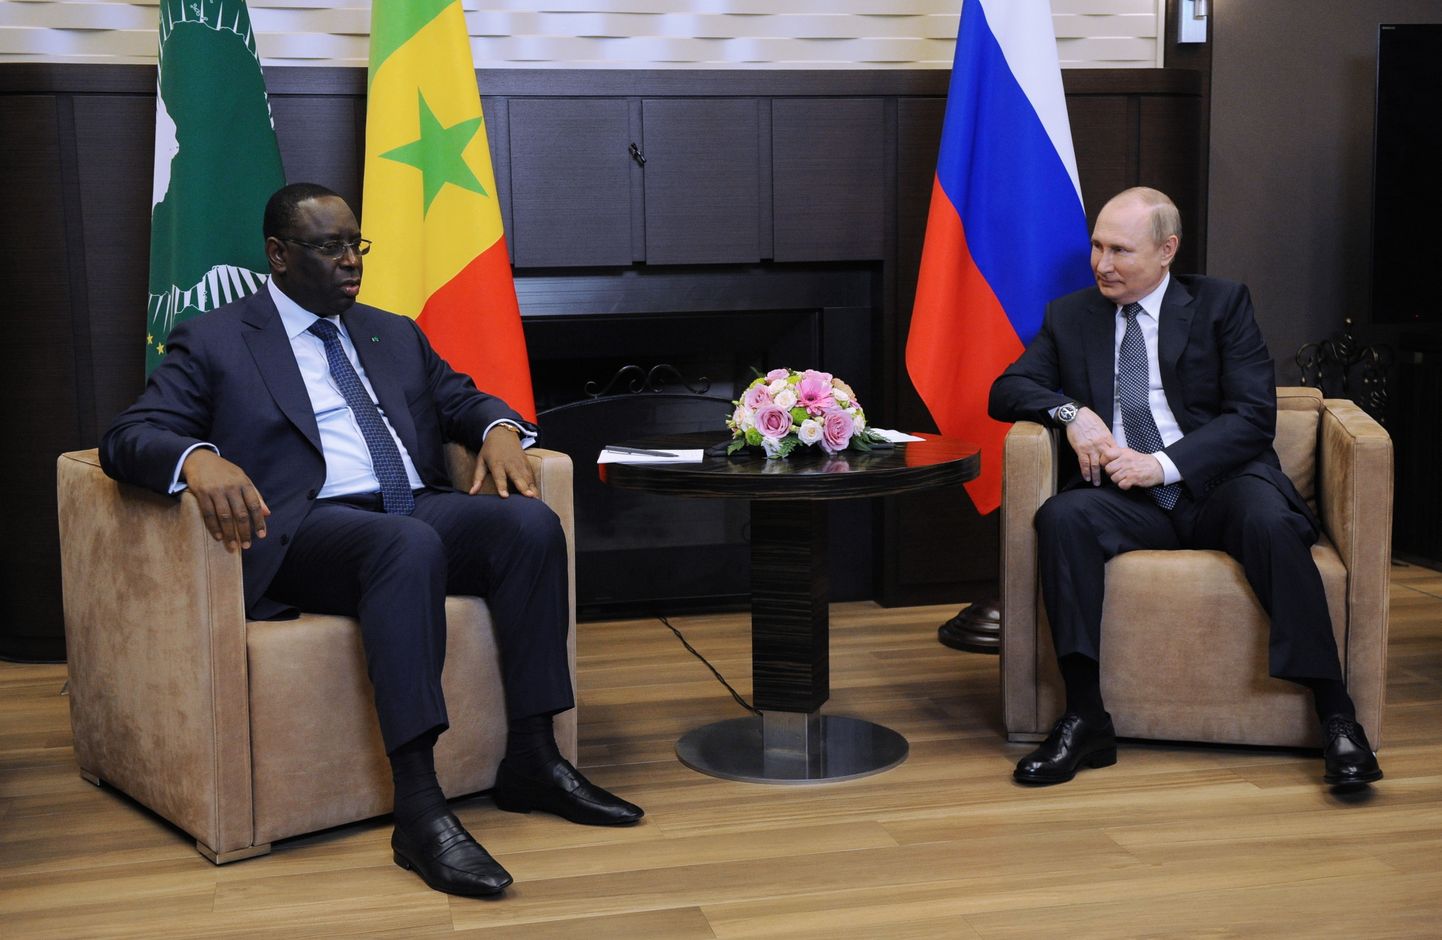 epa09993453 Russian President Vladimir Putin (R), and Chairperson of the African Union and Senegalese President Macky Sall (L) meet in the Black Sea resort of Sochi, Russia, 03 June 2022. Sall is on a working visit to Russia.  EPA/MIKHAIL KLIMENTYEV / KREMLIN POOL / SPUTNIK MANDATORY CREDIT